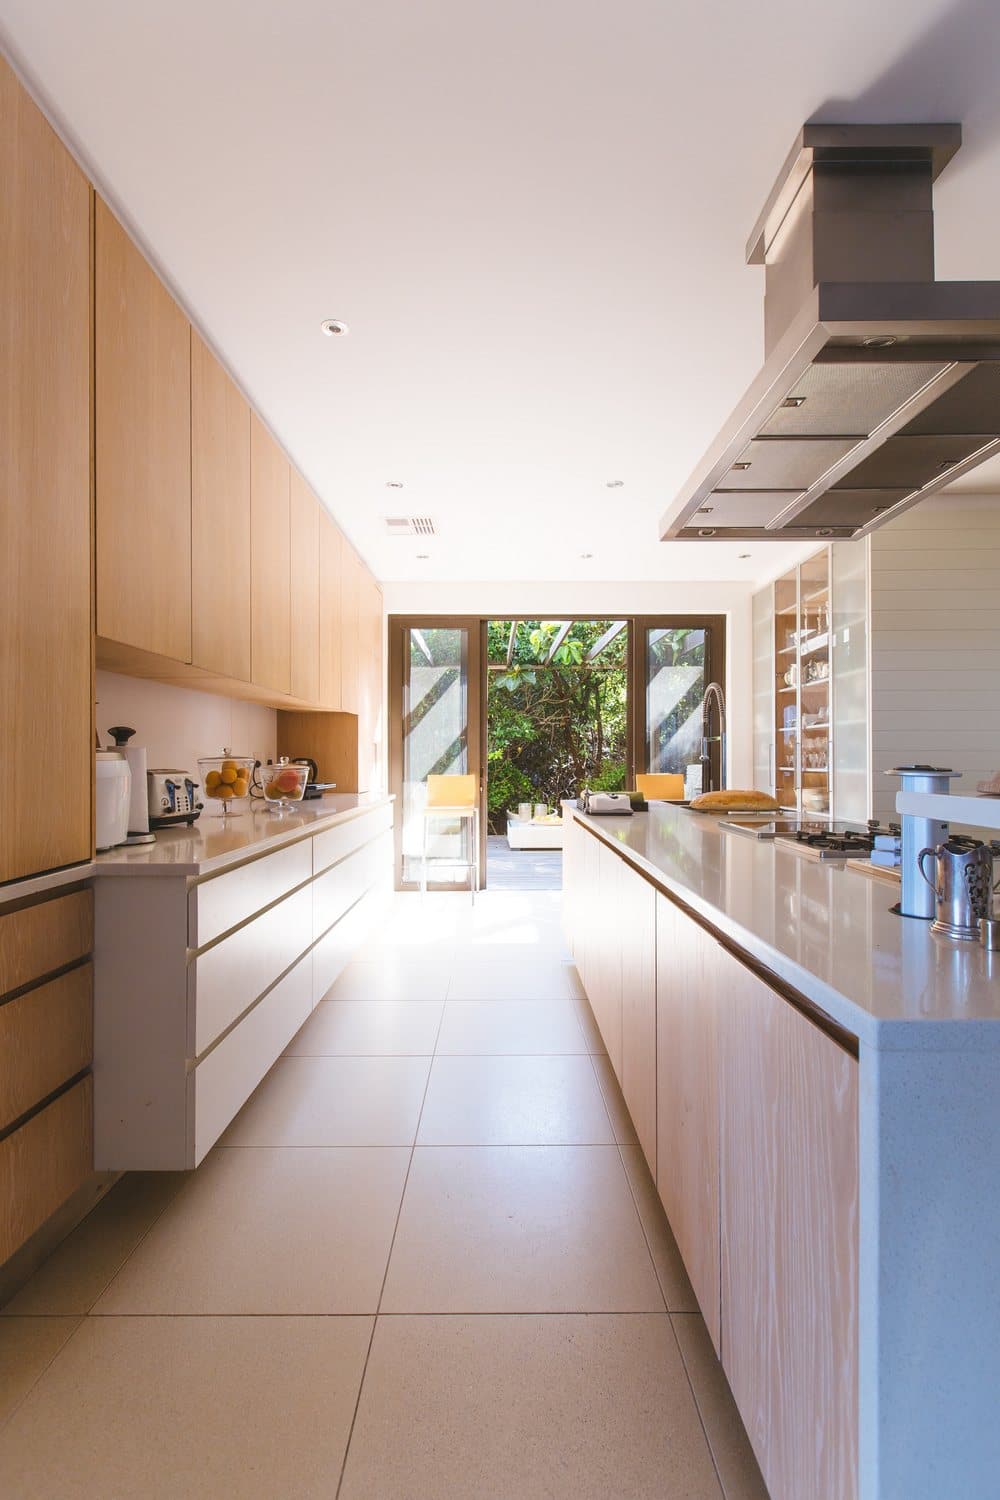 Sustainable Kitchen Trends Holding Sway